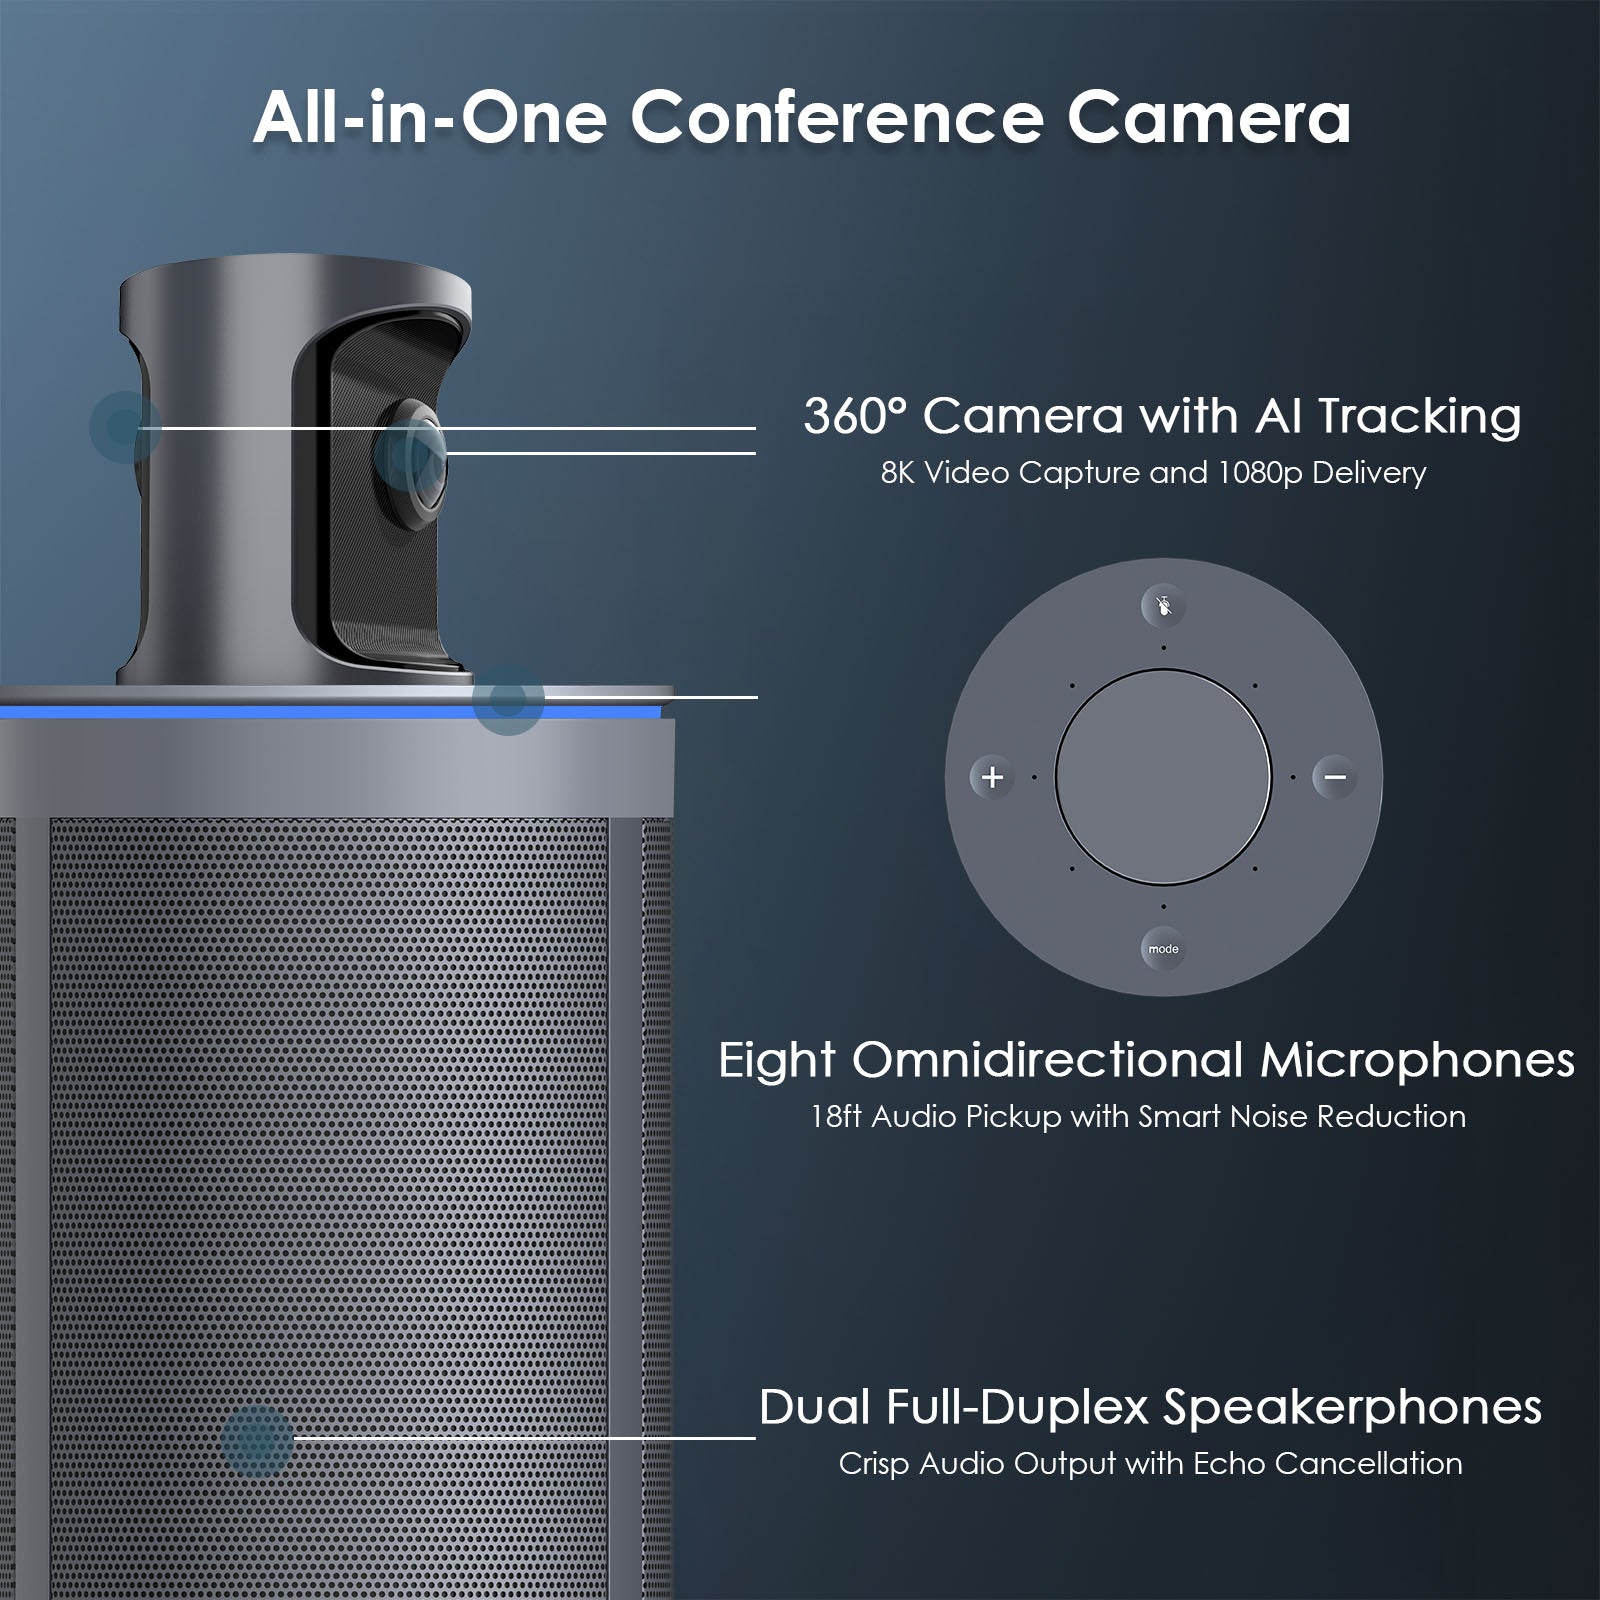 All-in-One Conference Camera: 360° Camera, 8 Omnidirectional Microphones, Dual Speakerphones